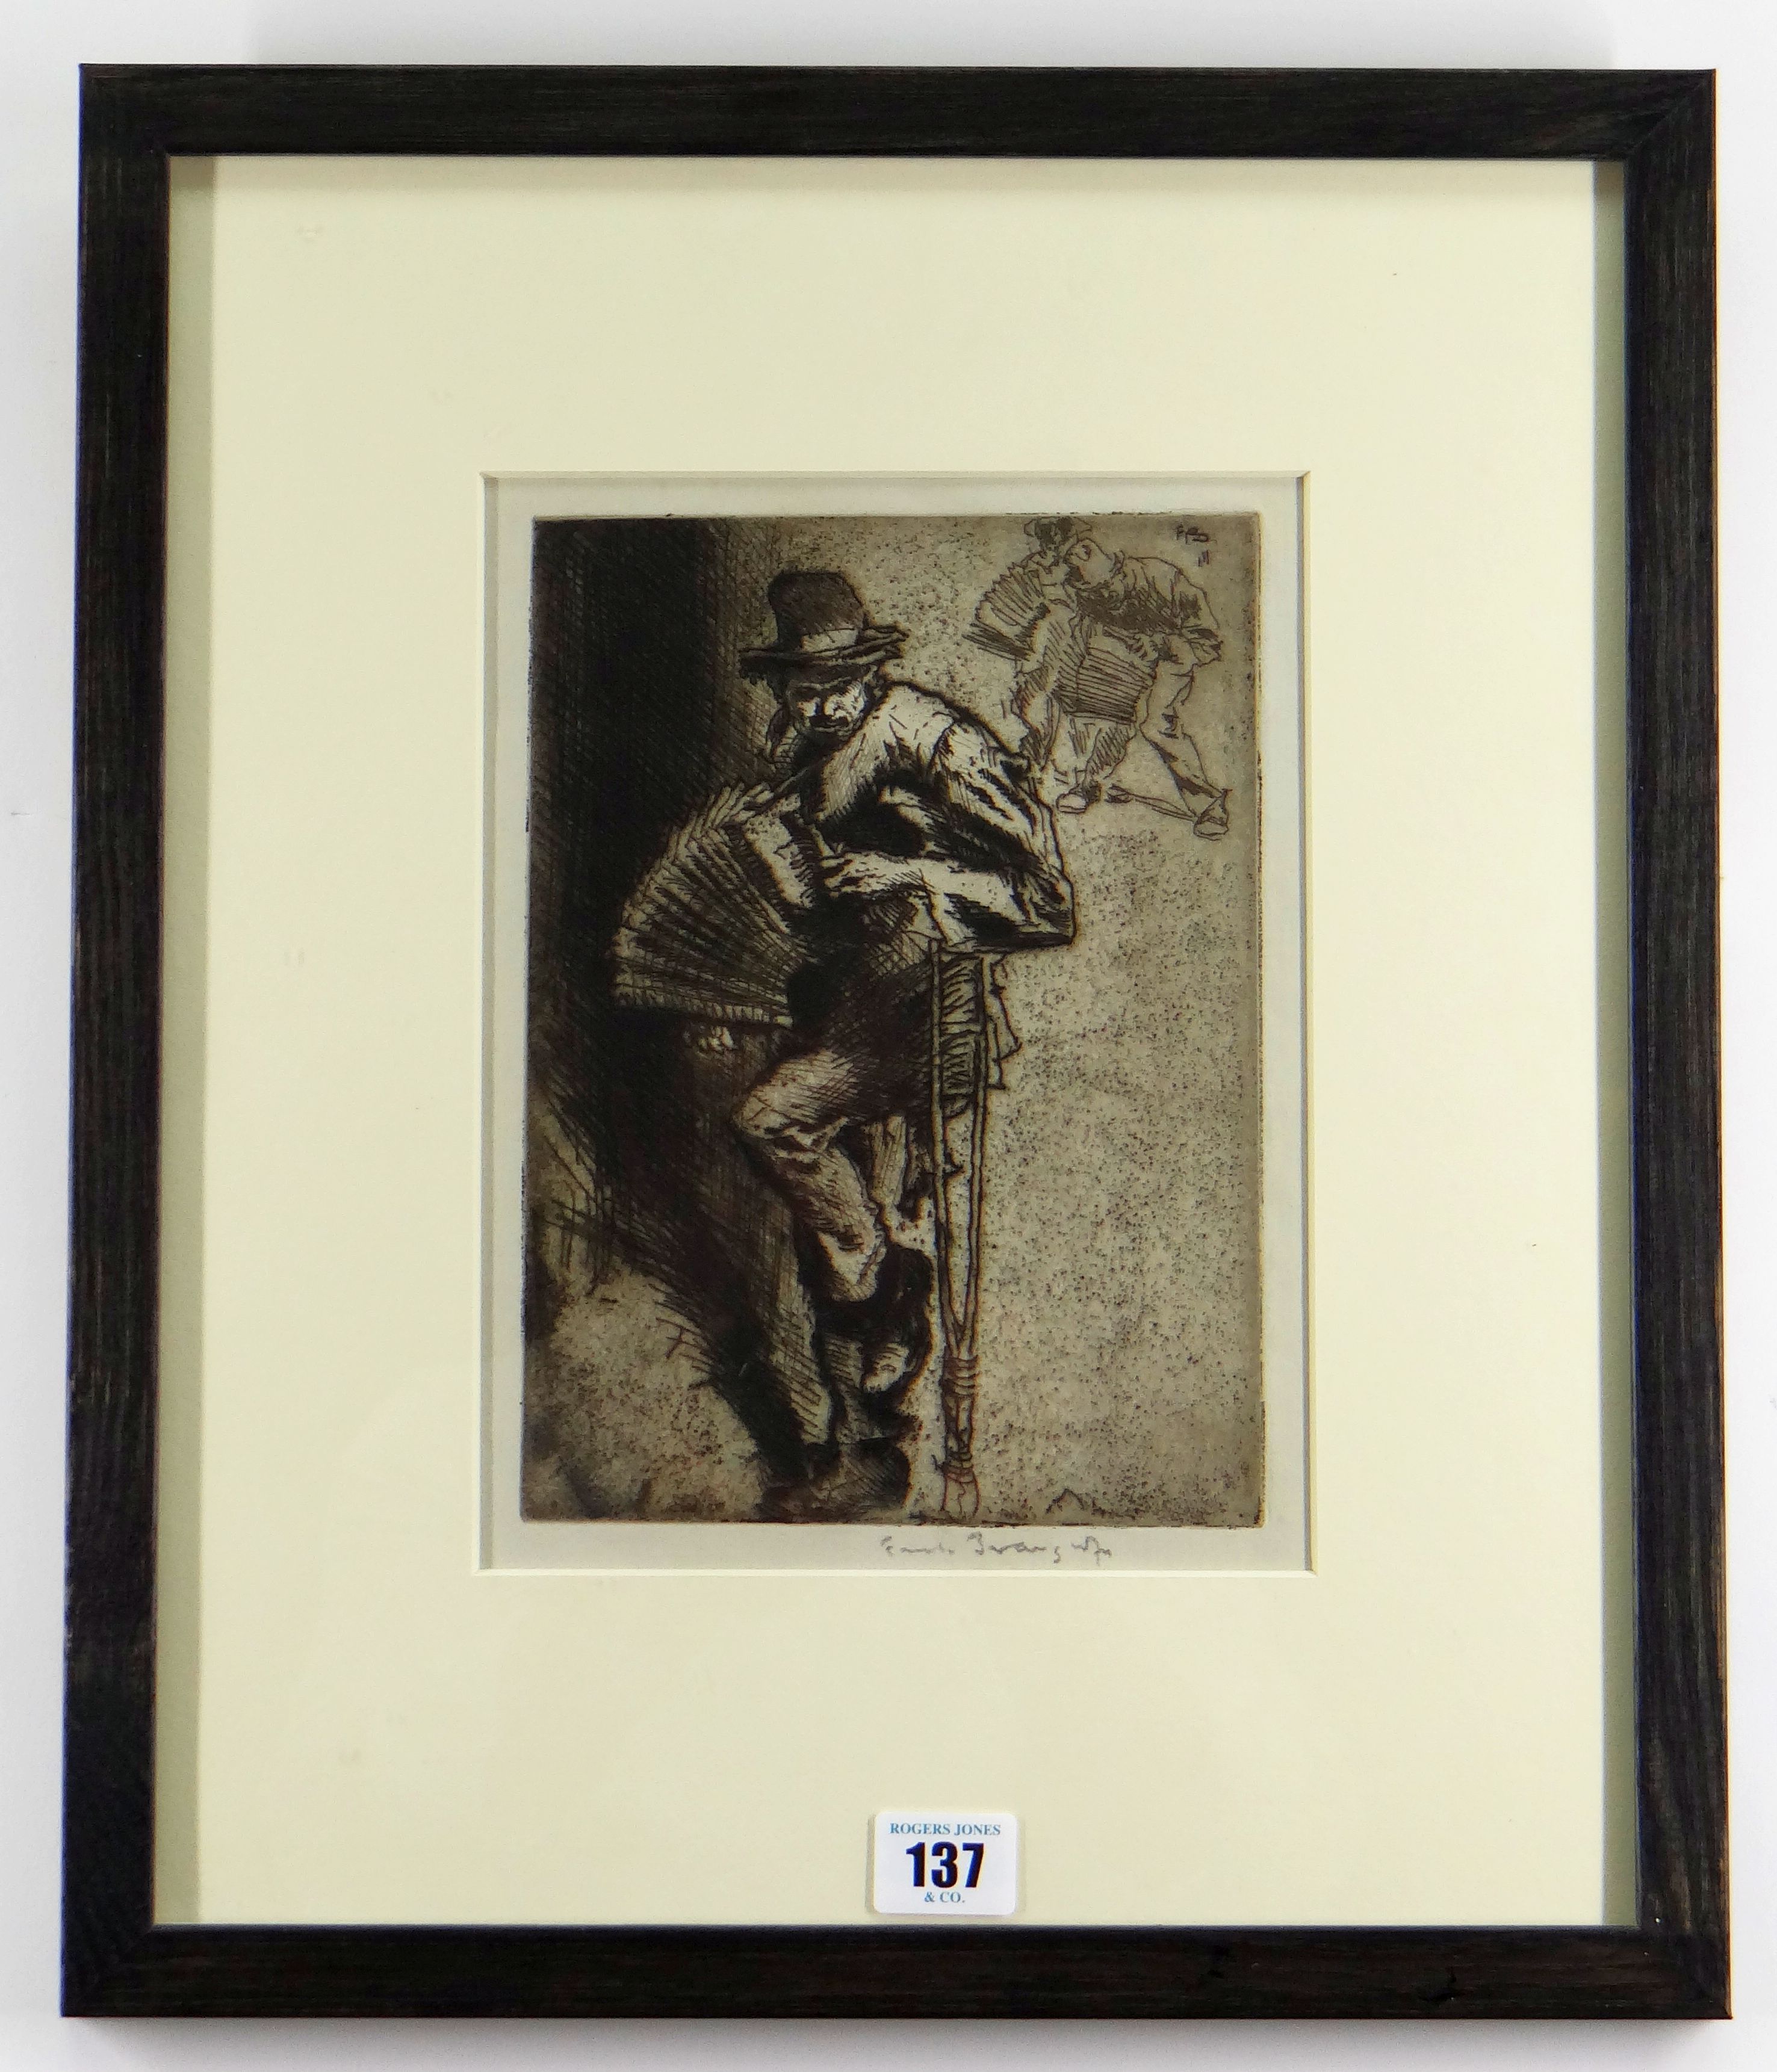 SIR FRANK BRANGWYN RA 1911 etching - entitled 'The Beggar Musician' signed in pencil, 24 x 18cms - Image 2 of 2